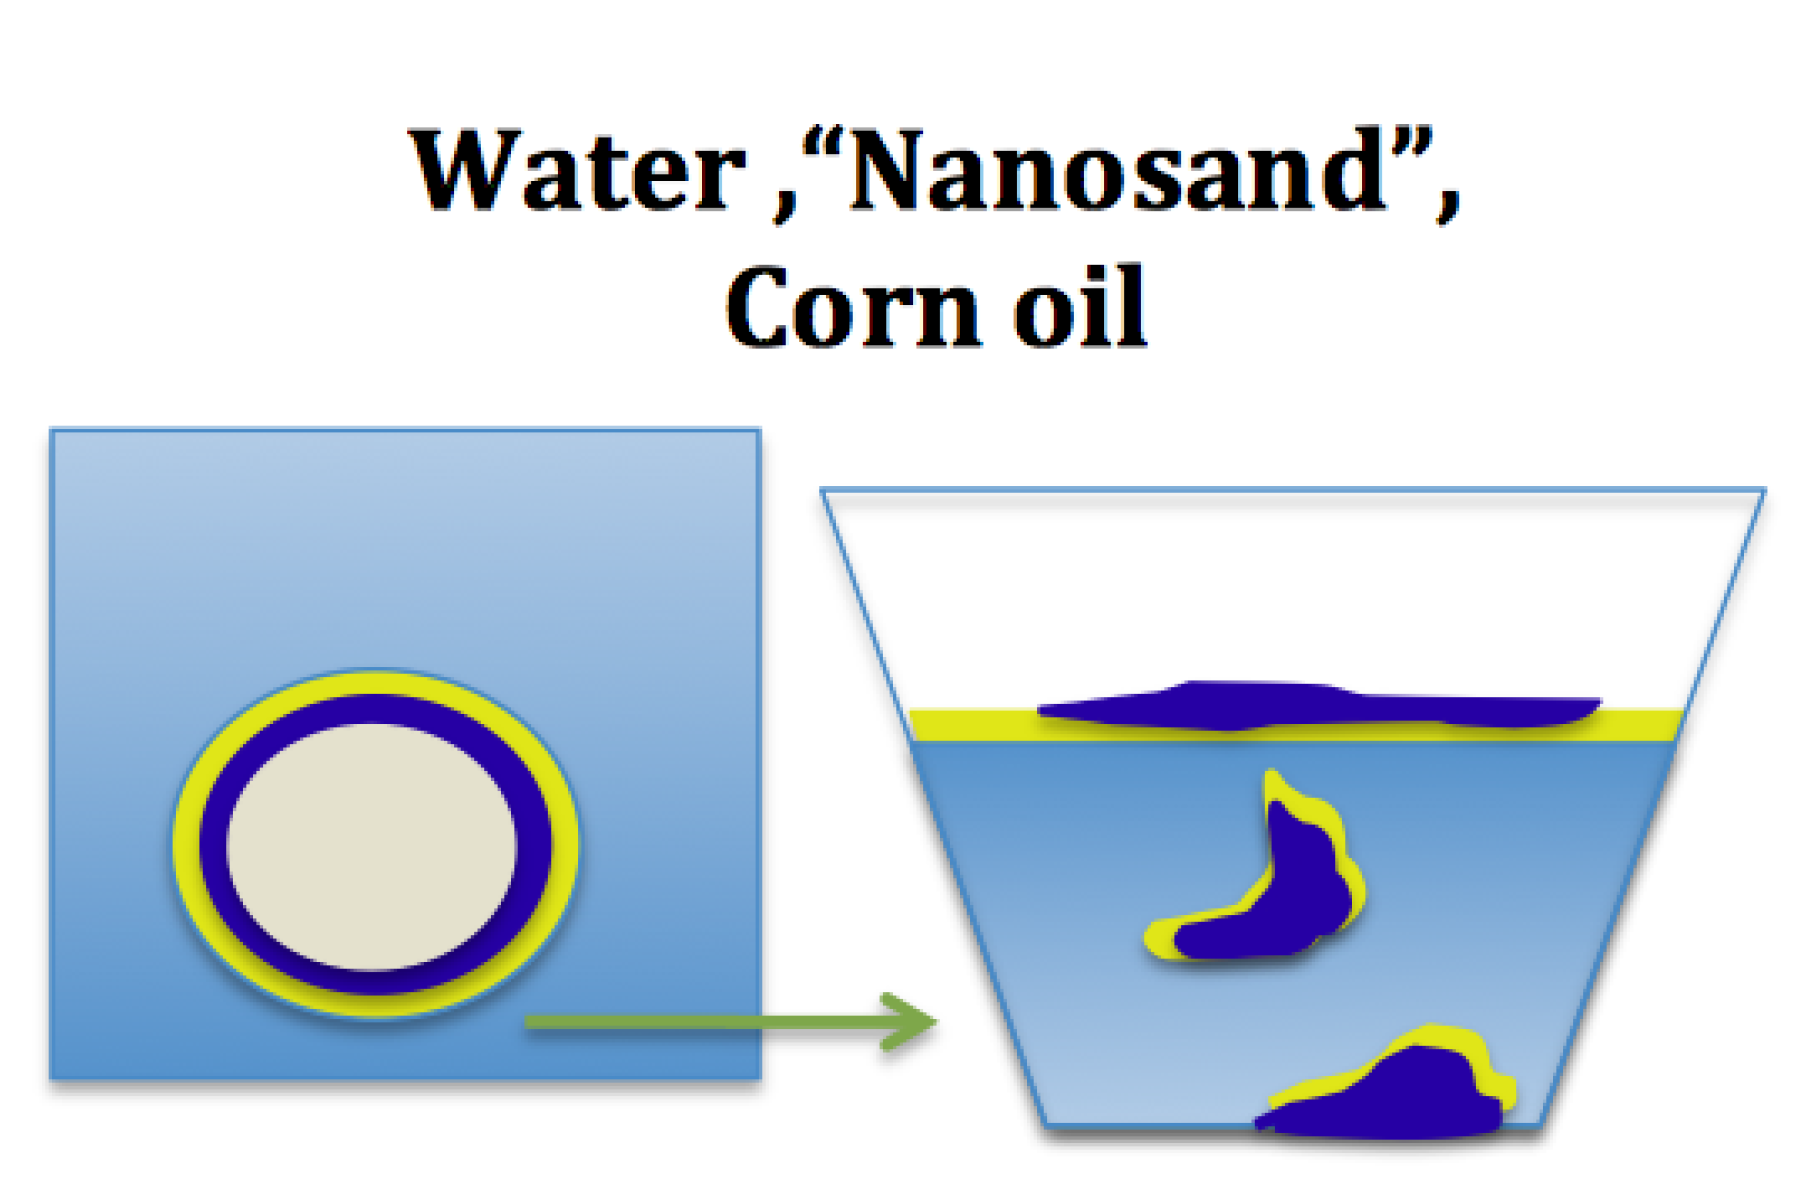 Diagram of oil in water and nanosand